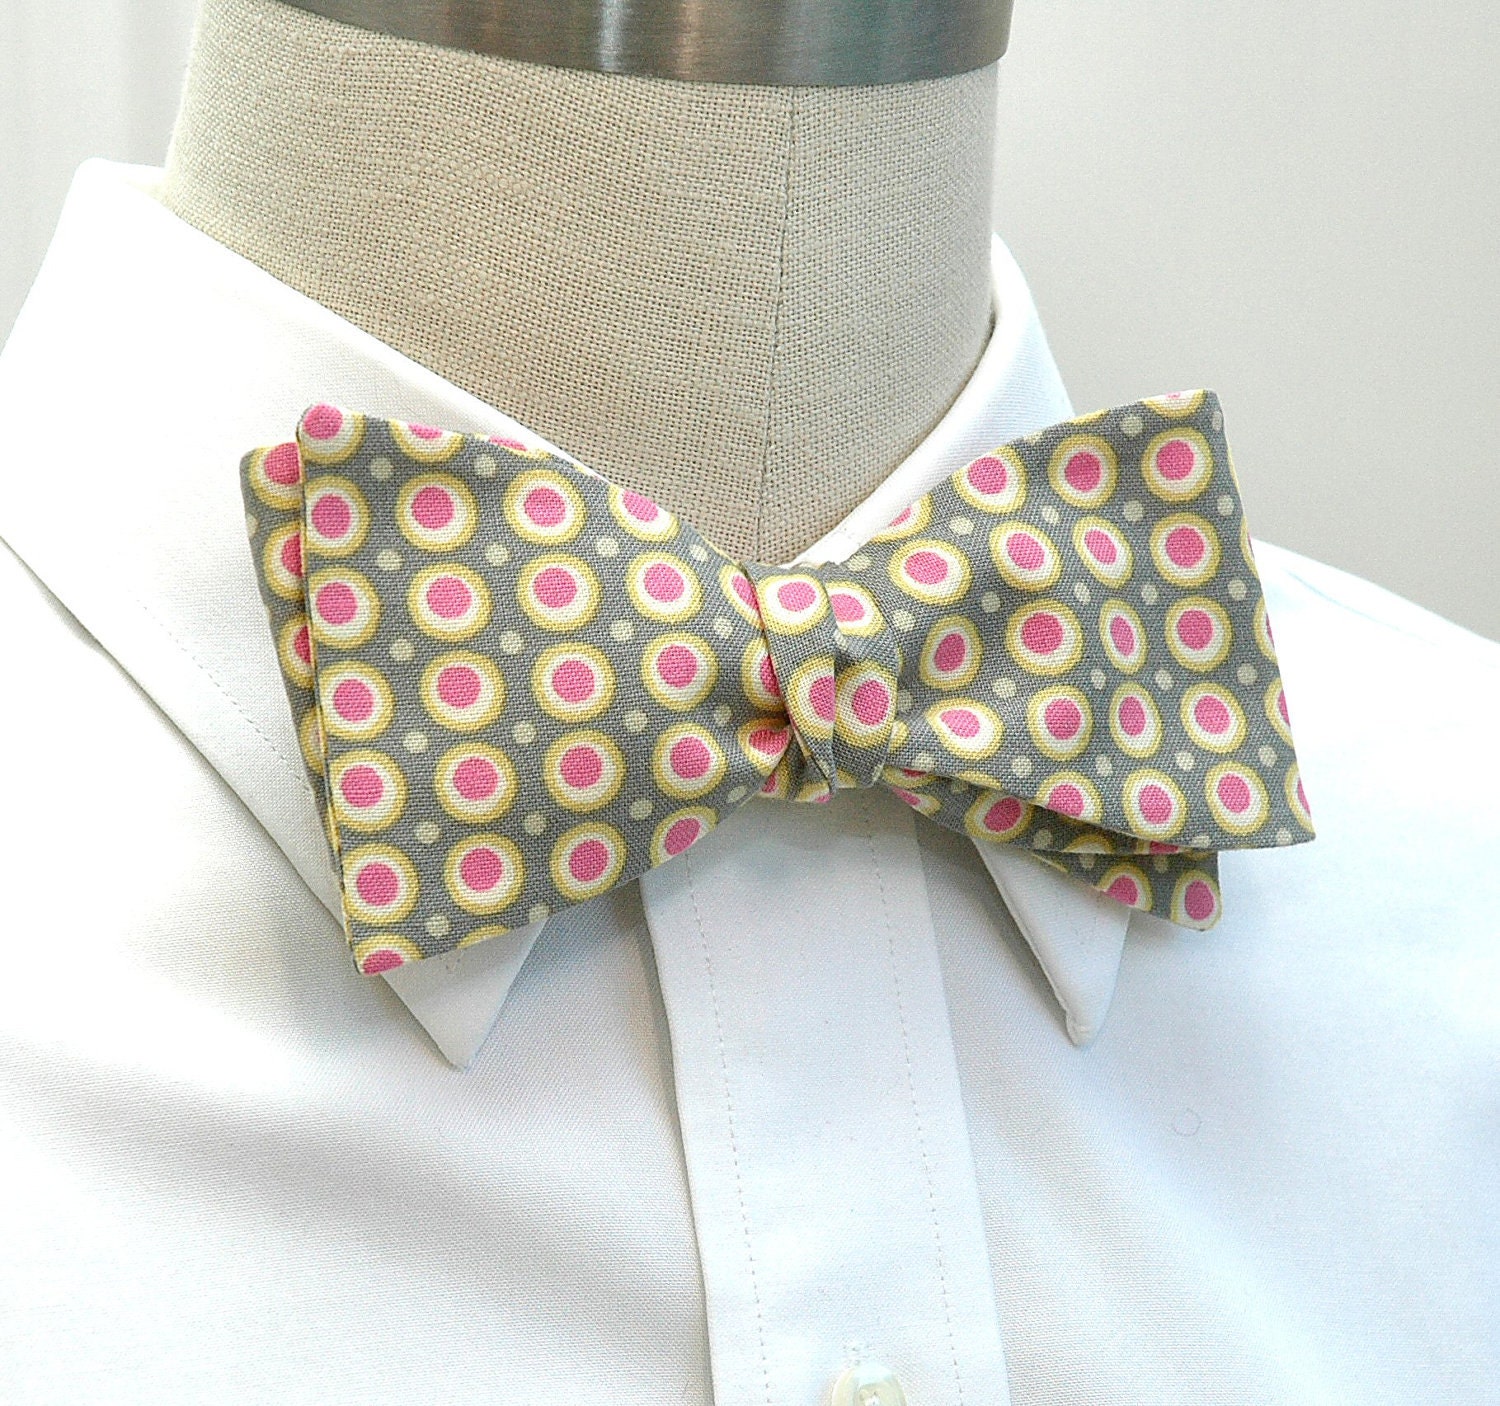 Men's Bow Tie in grey with yellow and pink dots self-tie